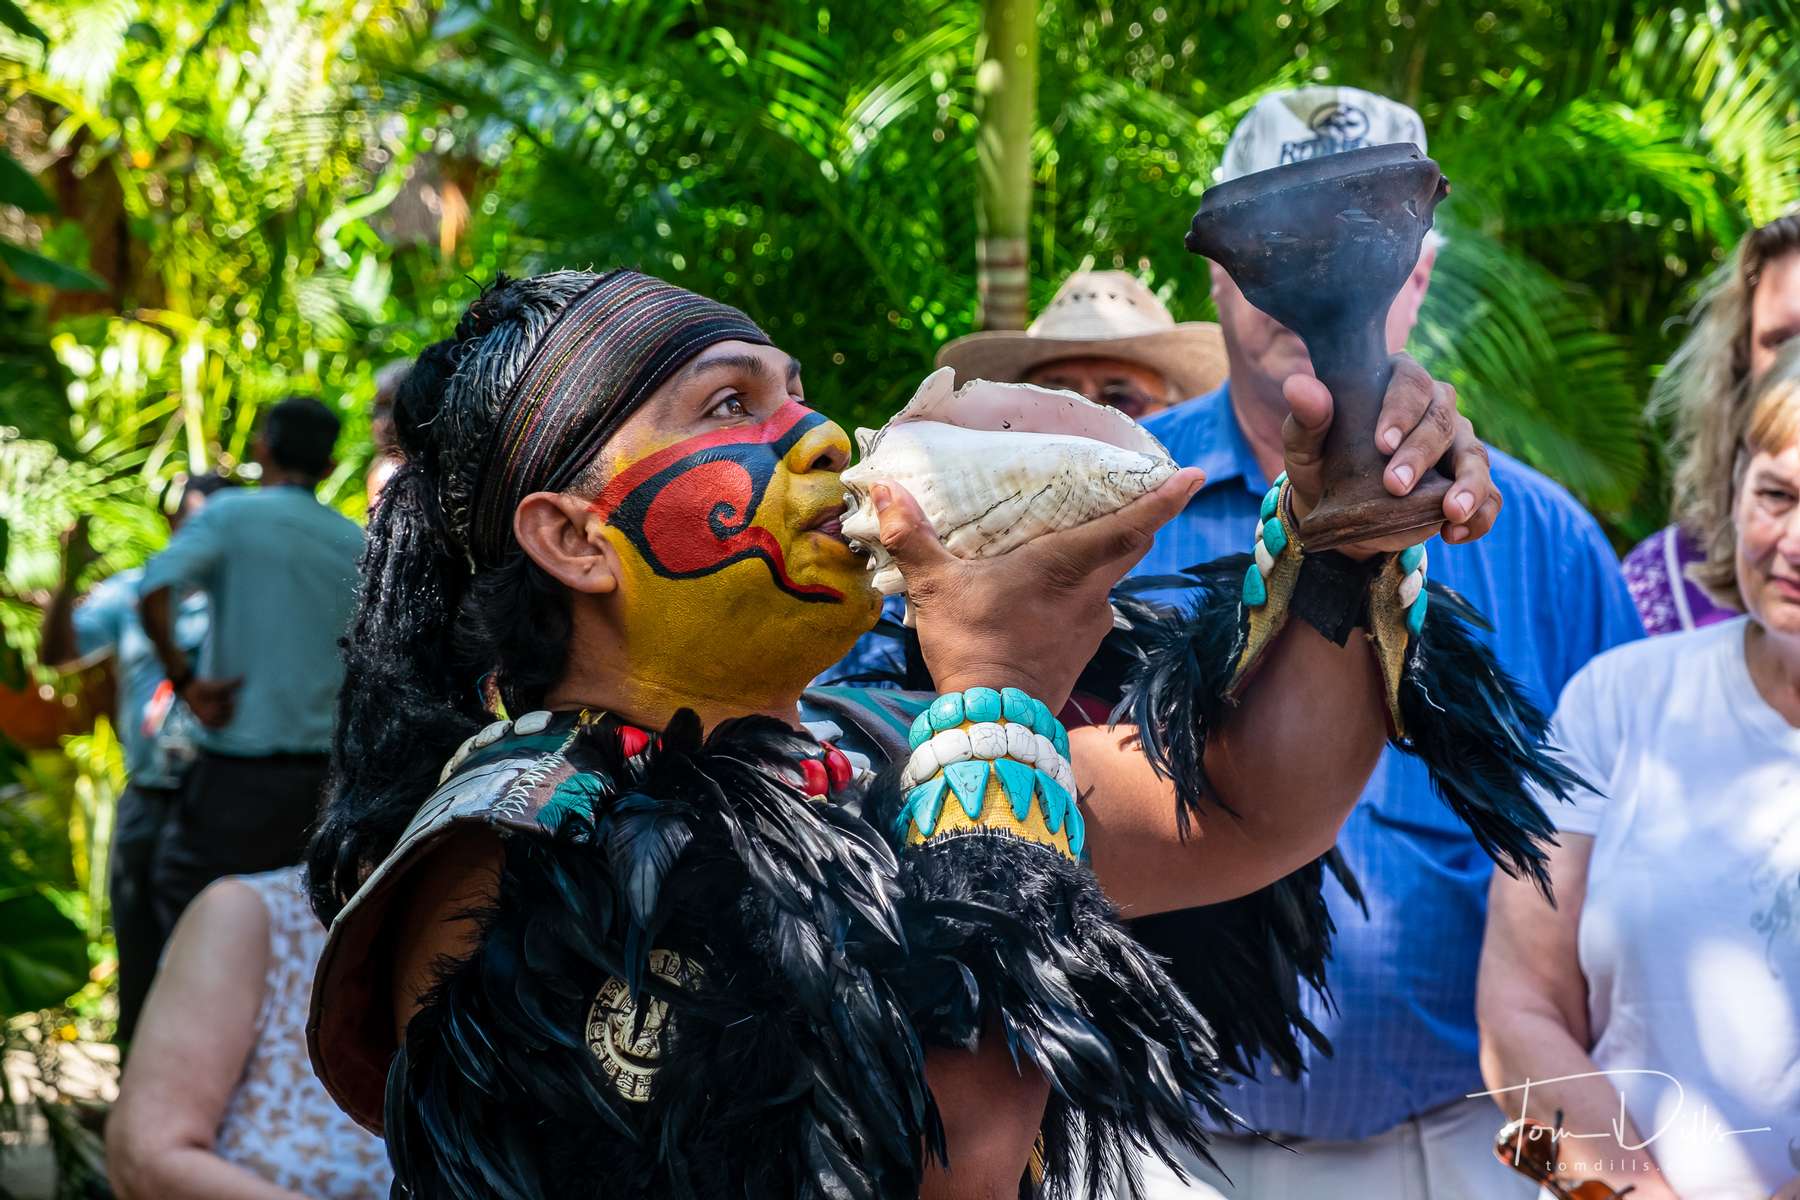 A traditional Mayan ceremony at The Mayan Cacao Company on our Island Discovery & Chocolate Experience tour in Cozumel, Mexico